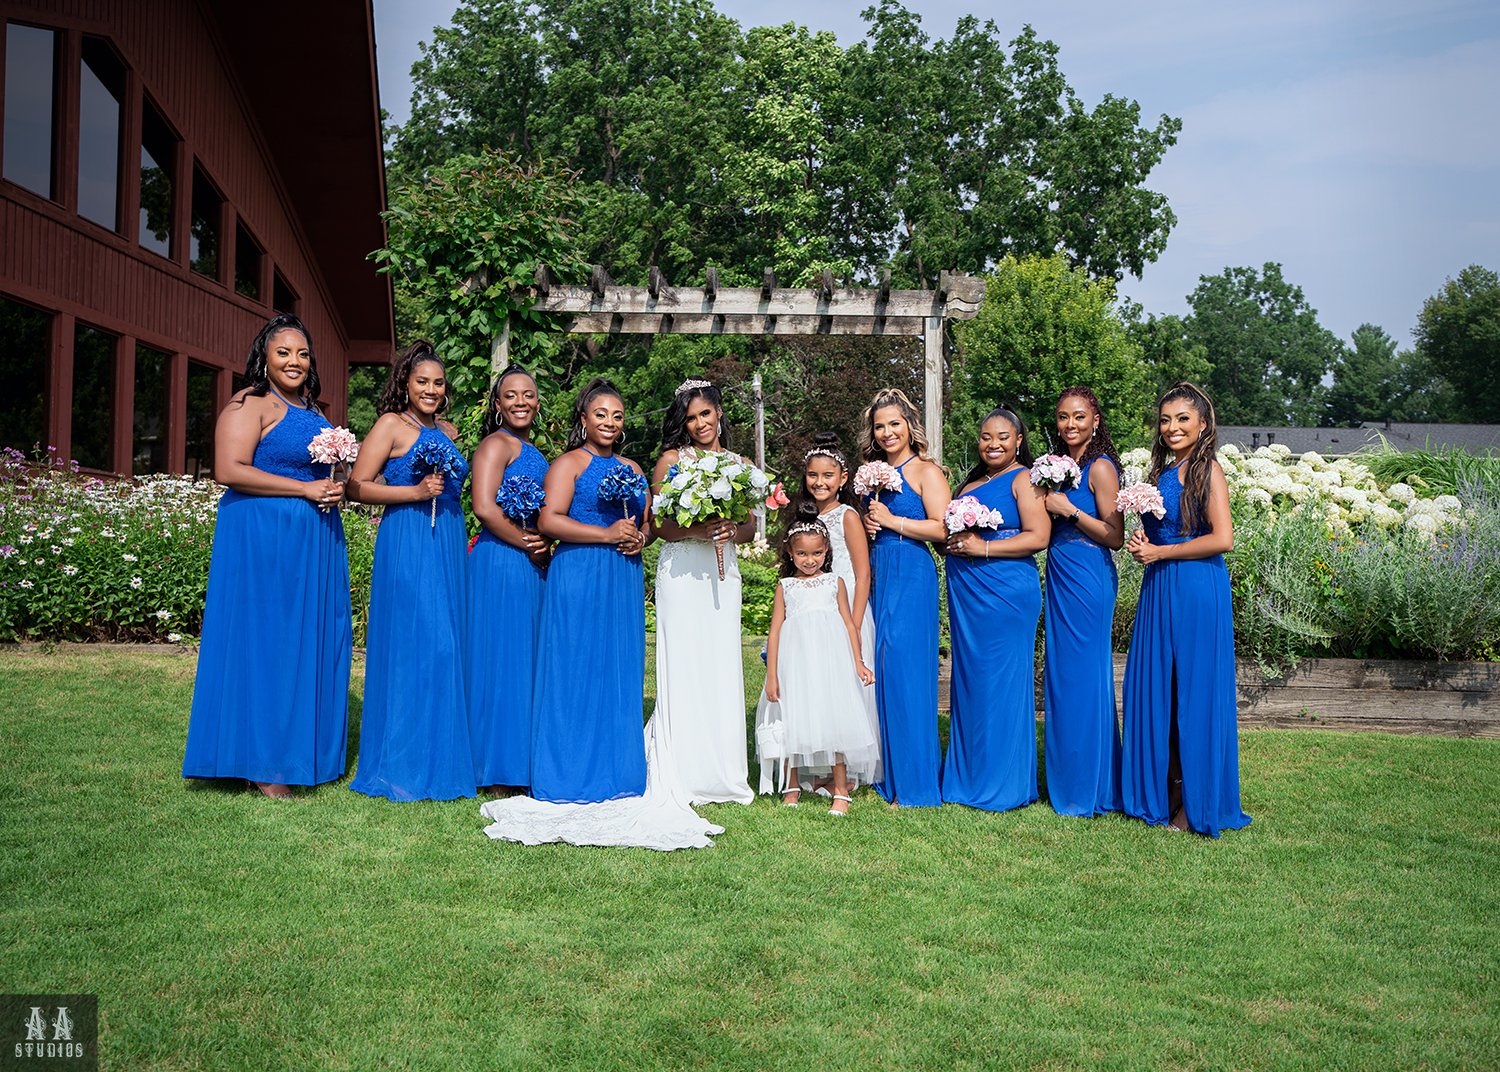 bride with 8 bridesmaids and 2 flower girls - Wedding portrait by AA Studios LLC 